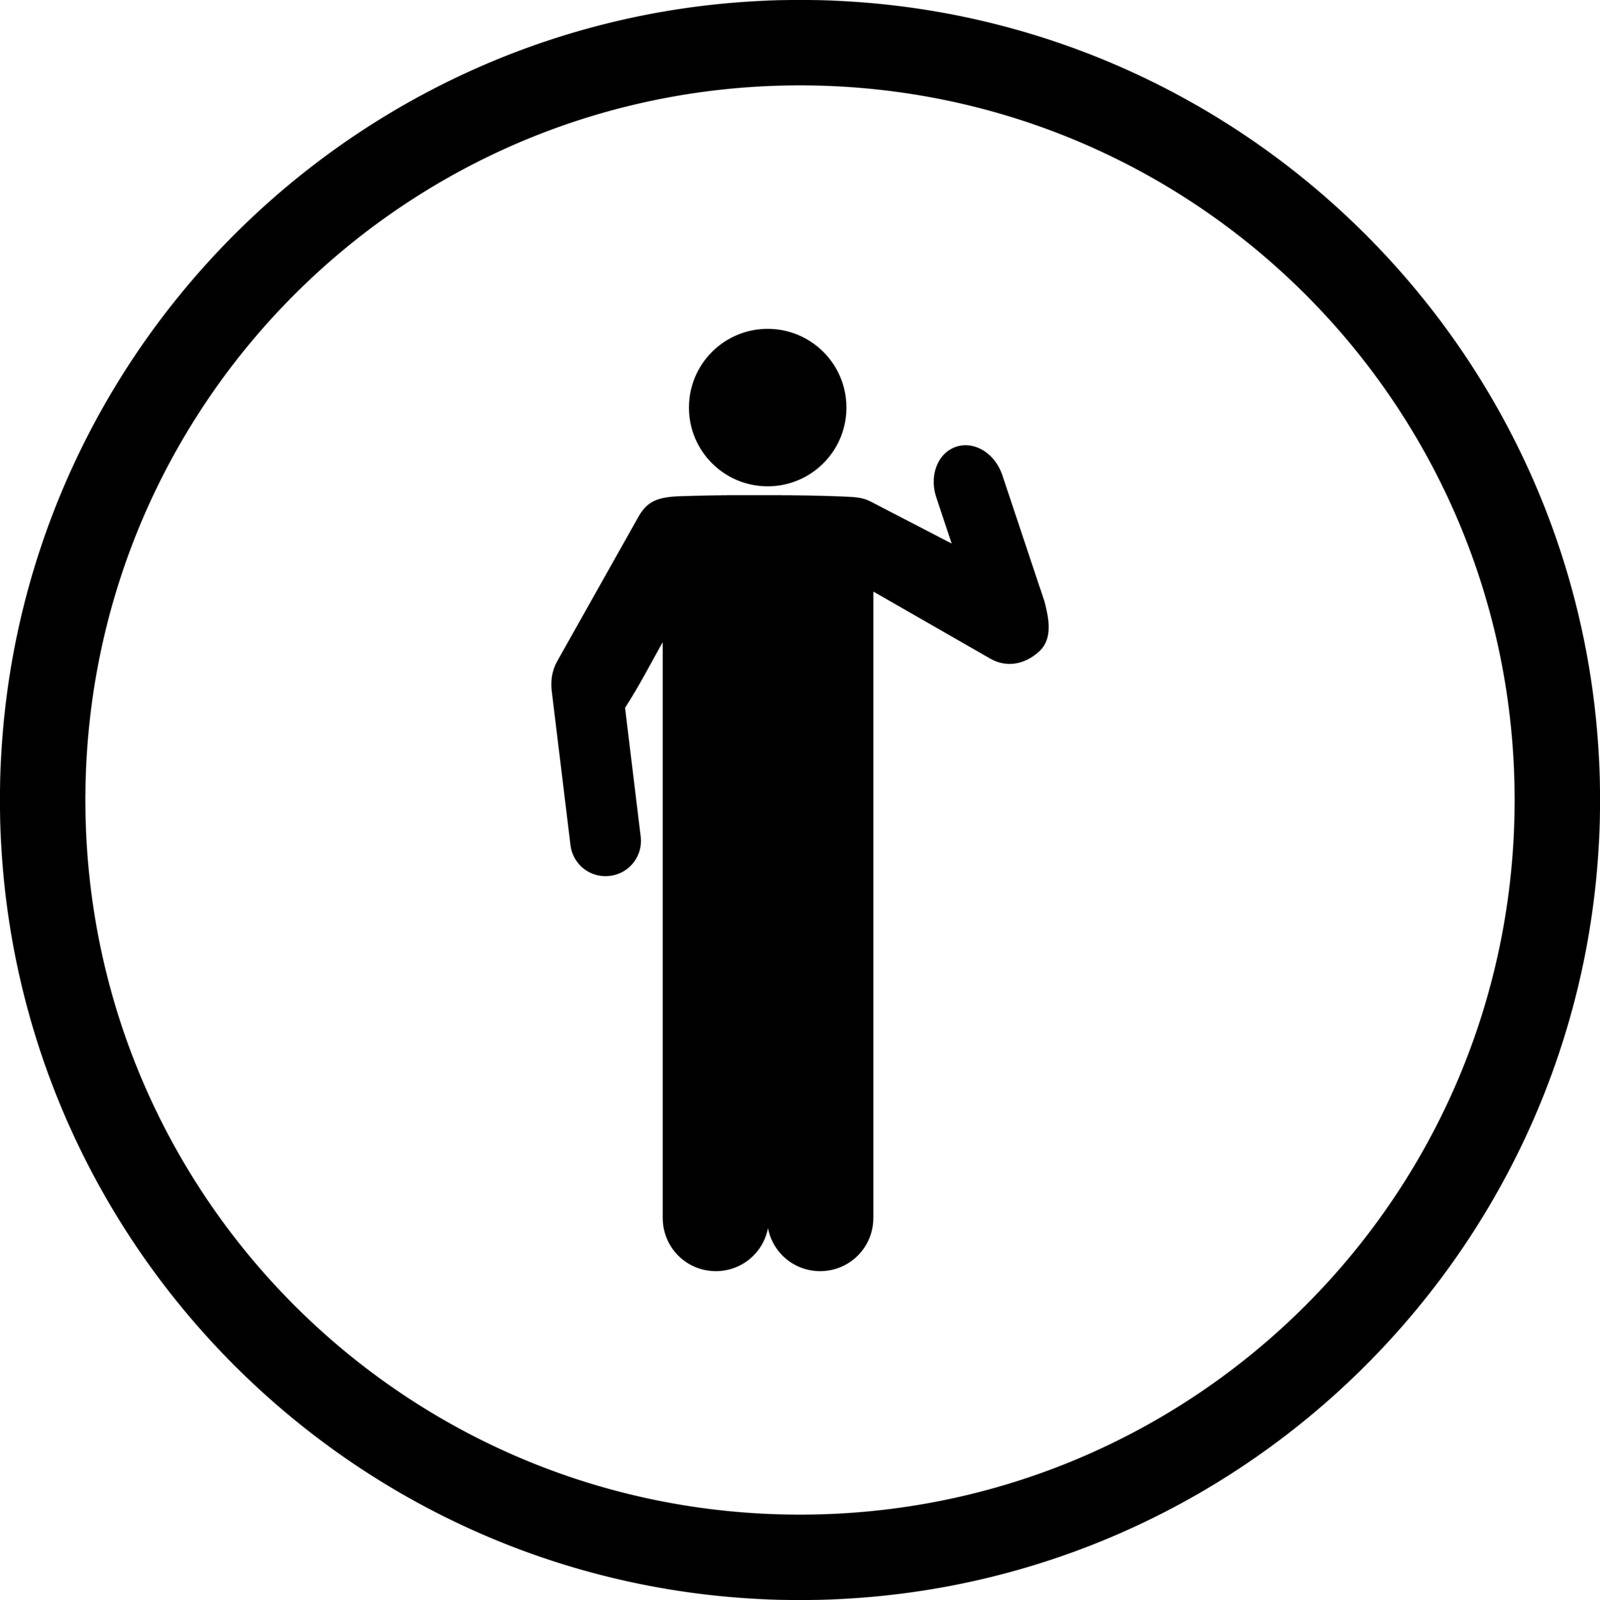 Opinion vector icon. This rounded flat symbol is drawn with black color on a white background.